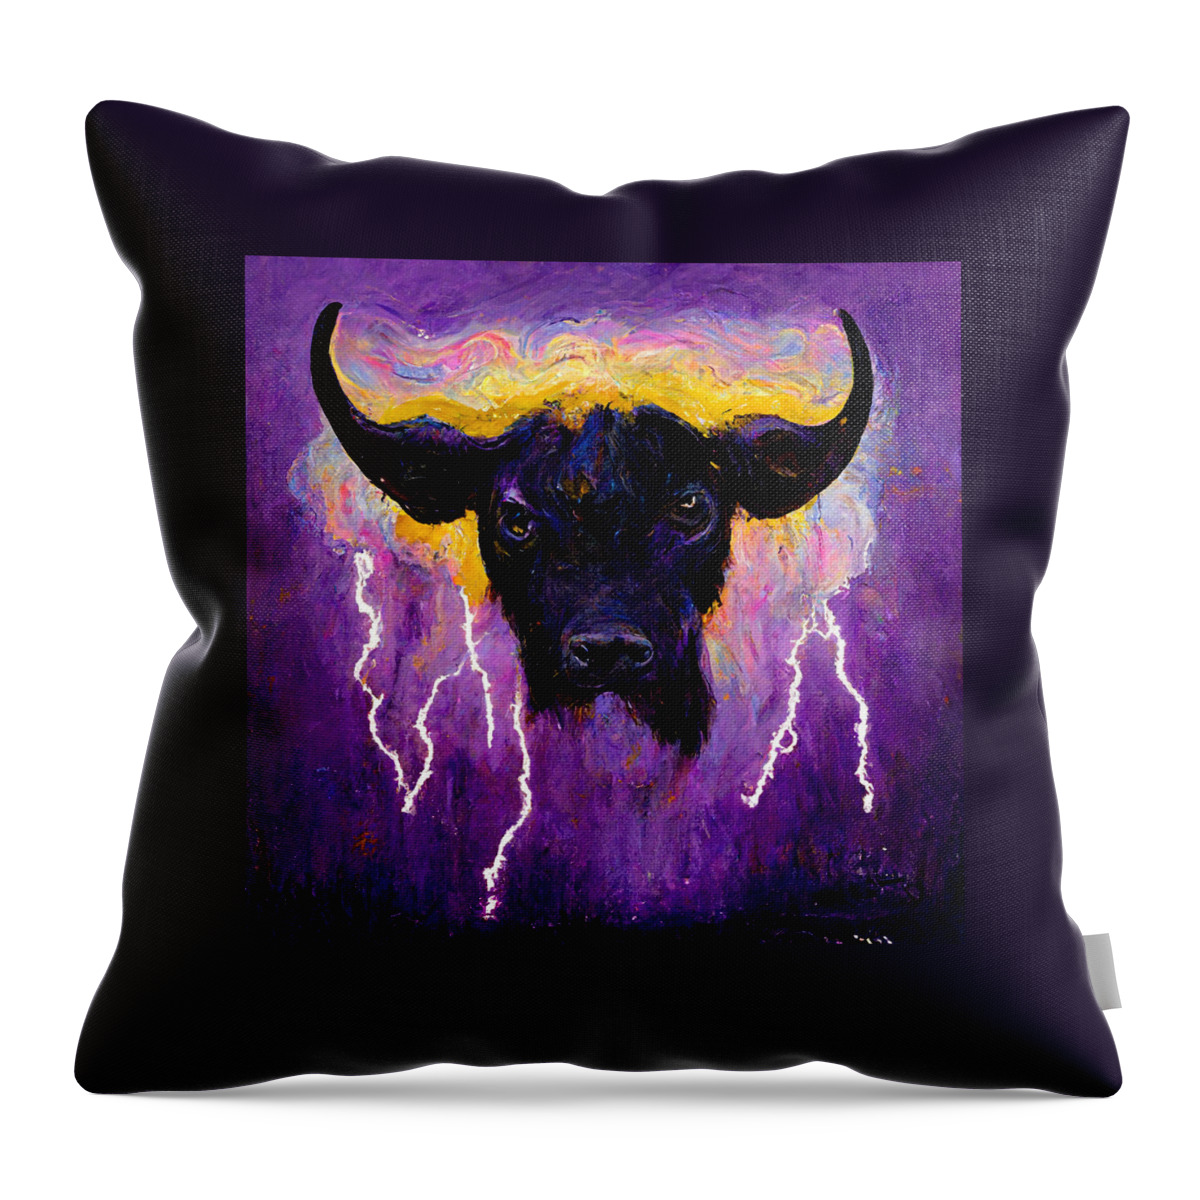 Black Cow Bull Painted By Eric Robitaille Lightning  B465d68d 1a3f 4398 8a3e 83b045de4fed Throw Pillow featuring the painting black cow bull painted by Eric Robitaille lightning  b465d68d 1a3f 4398 8a3e 83b045de4f by MotionAge Designs